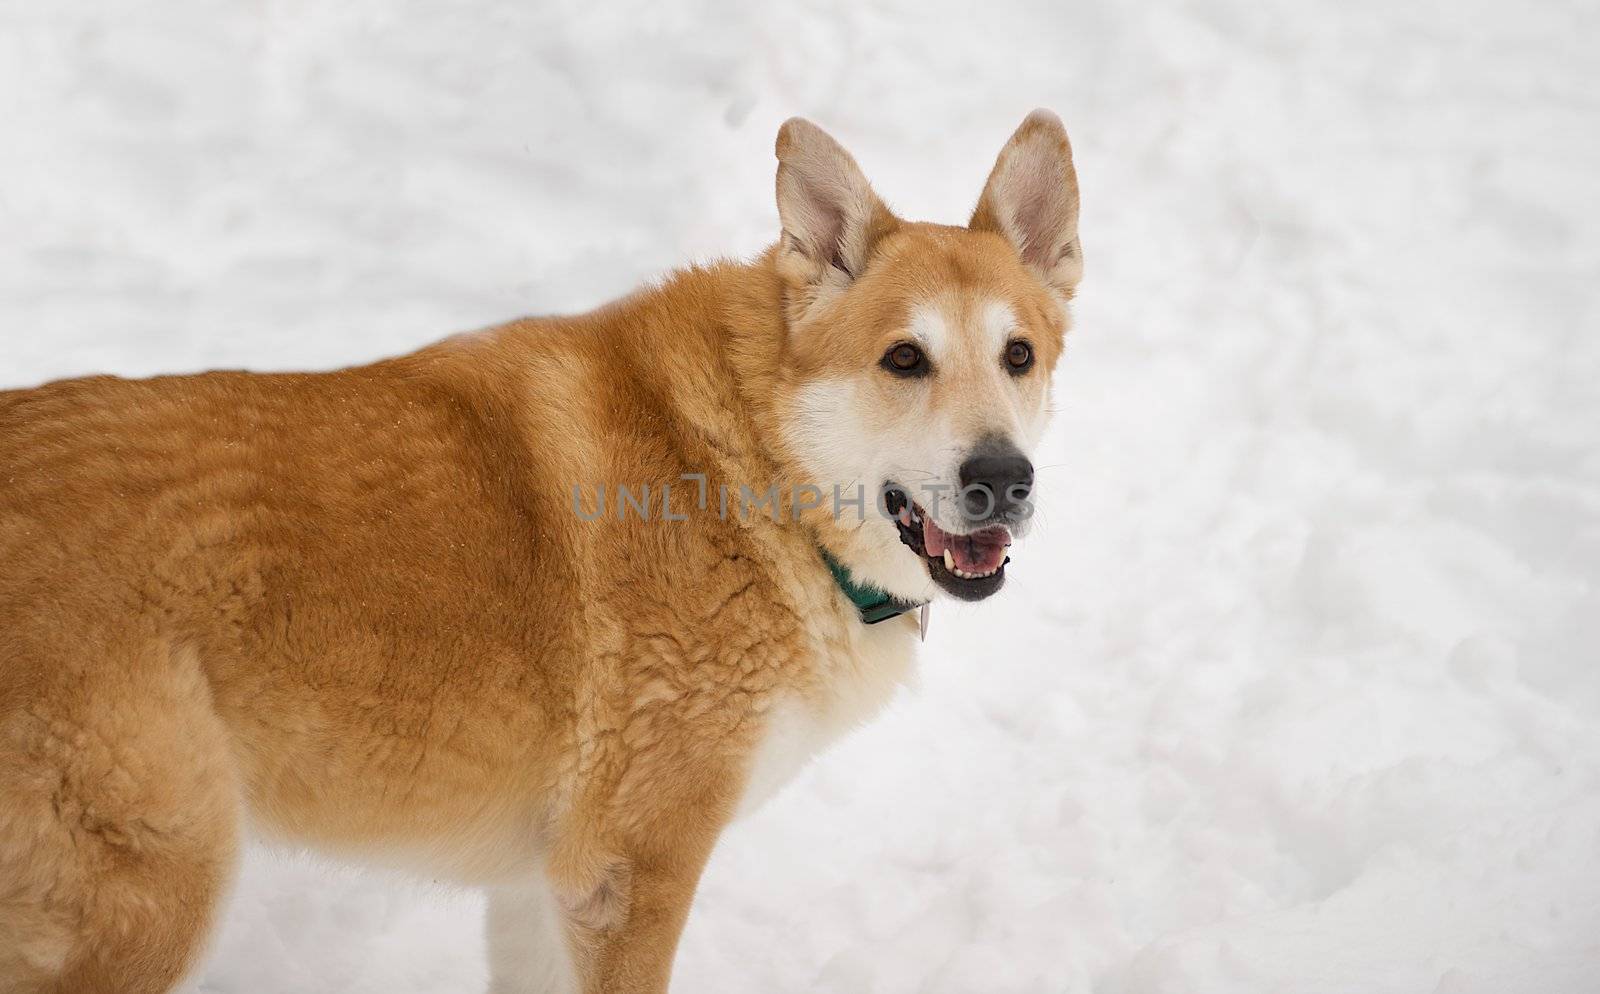 Siberian Husky mix alert and panting while standing in the snow